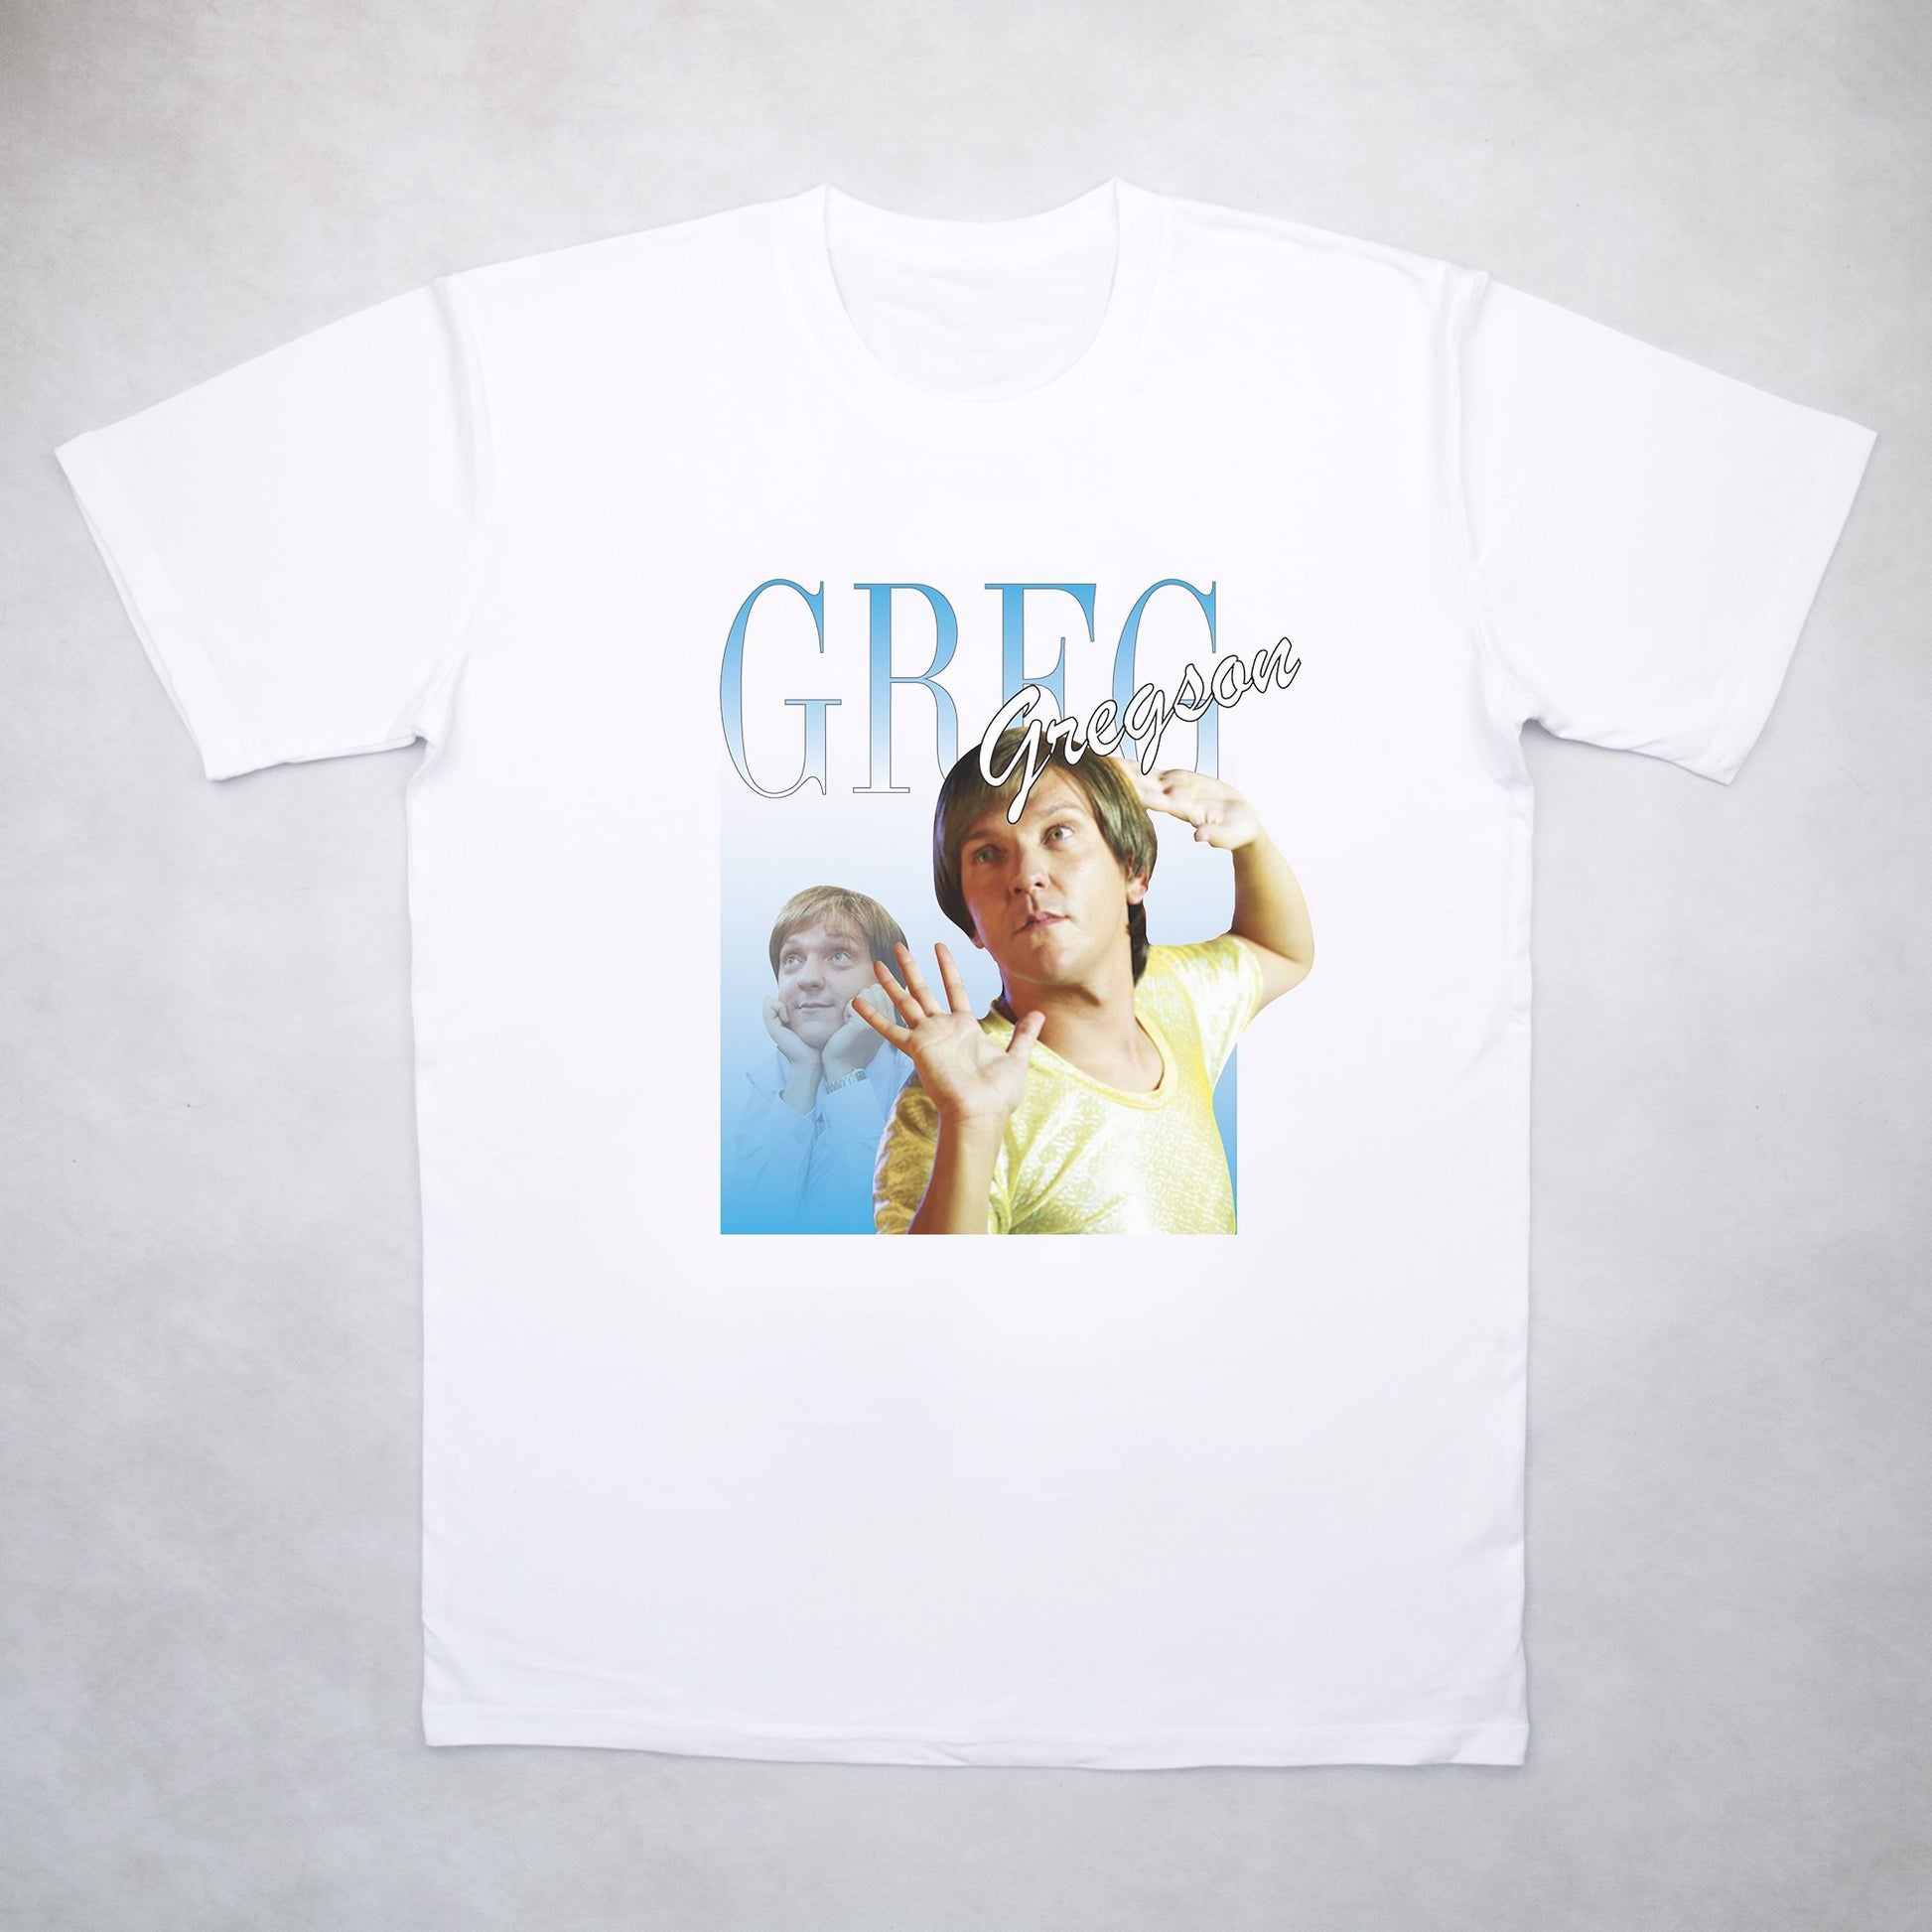 Classy Duds Short Sleeve T-Shirts Mr. G Commemorative Classic Tee